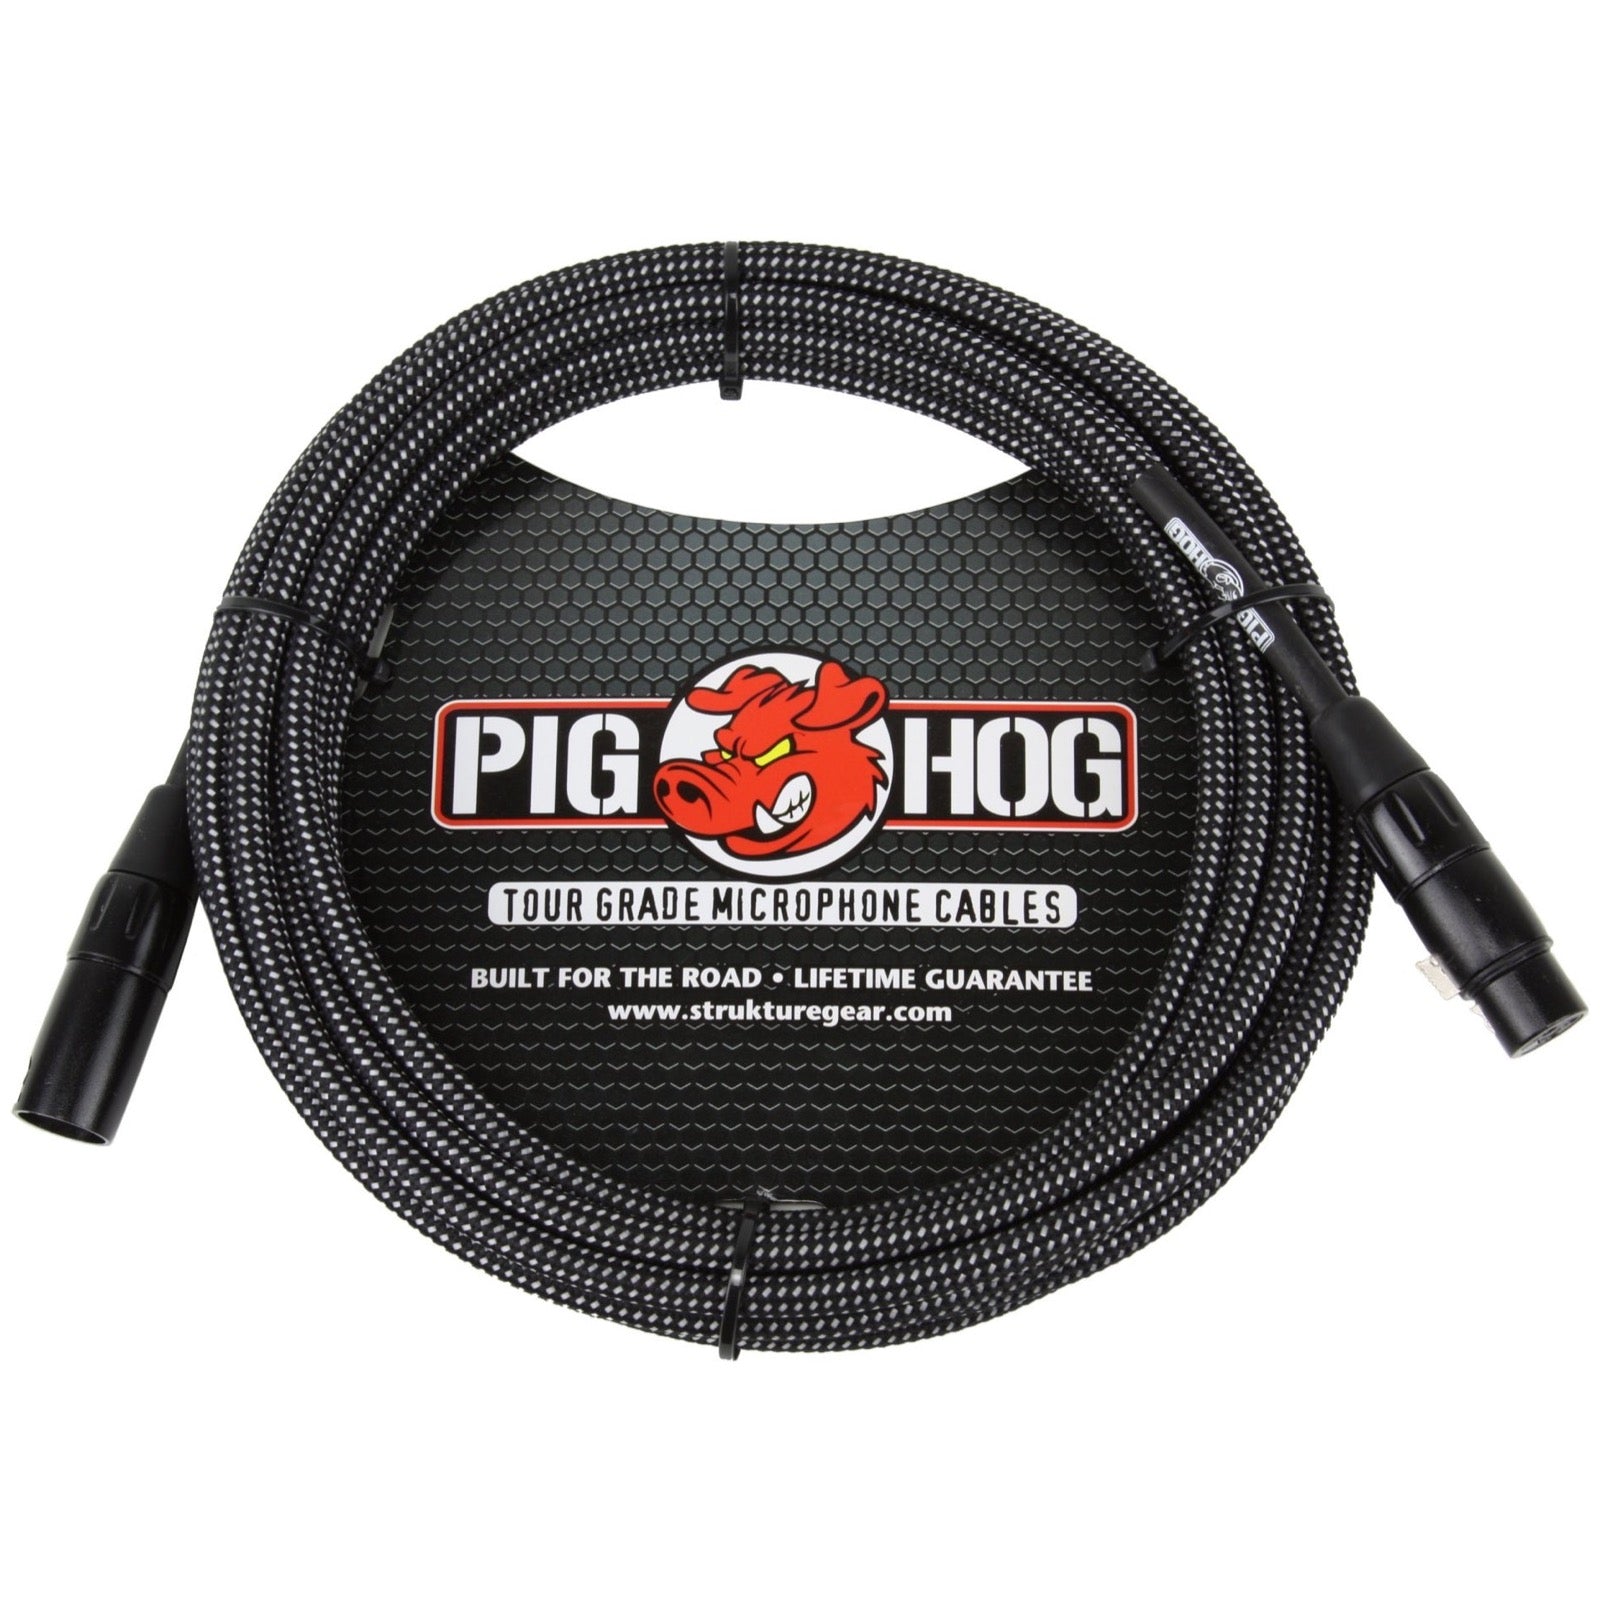 Pig Hog Woven XLR Microphone Cable, Black and White, 20 Foot